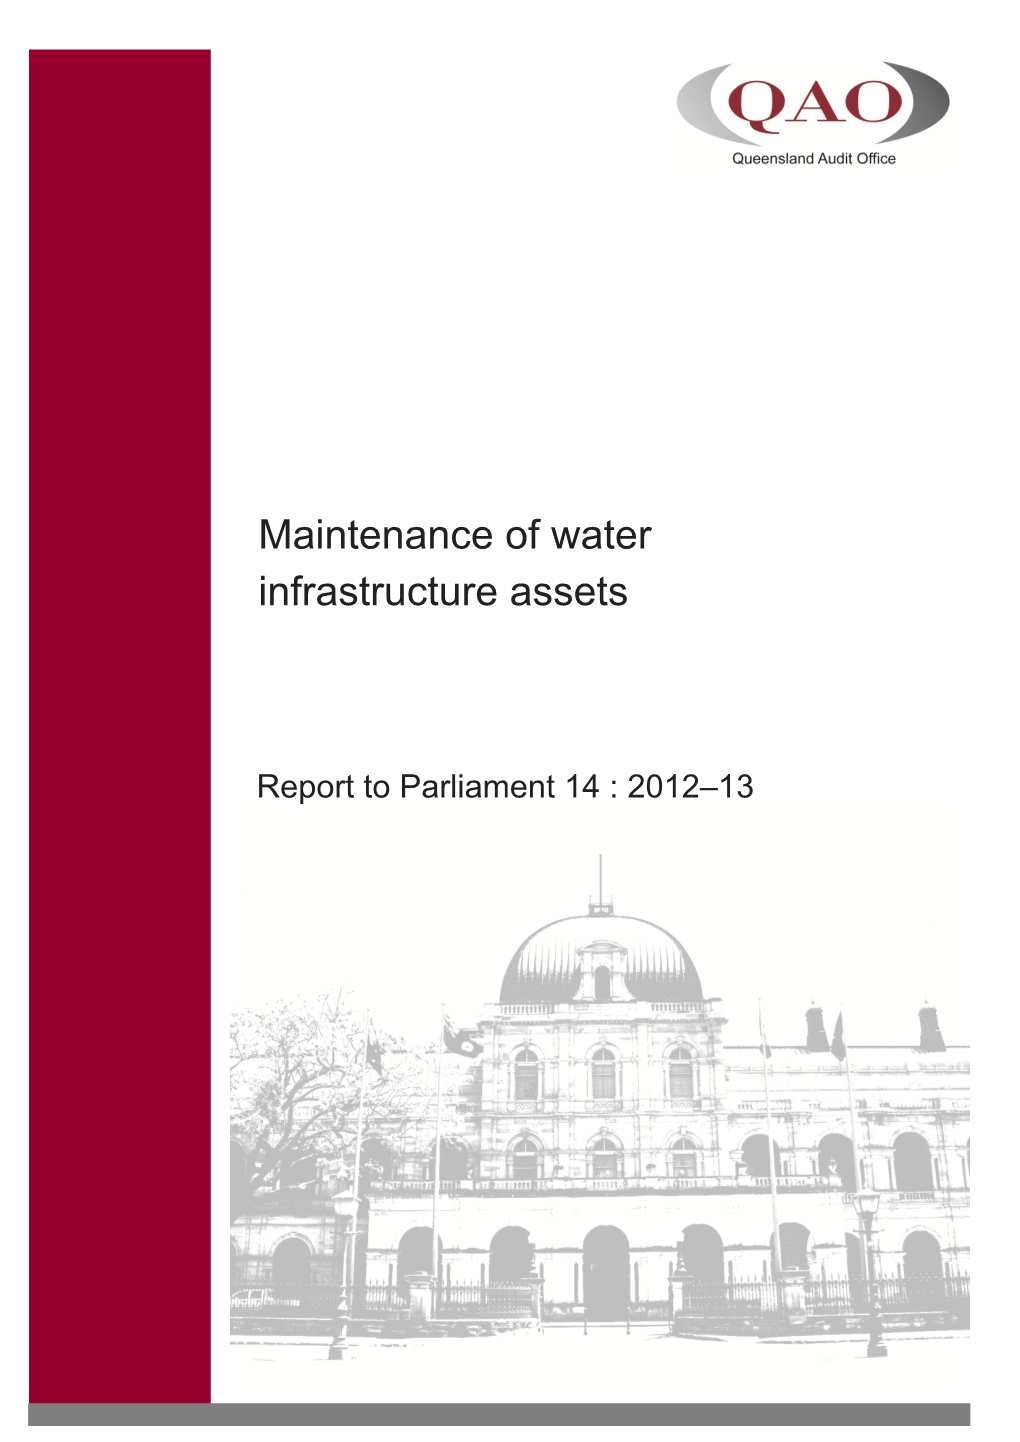 Maintenance of Water Infrastructure Assets